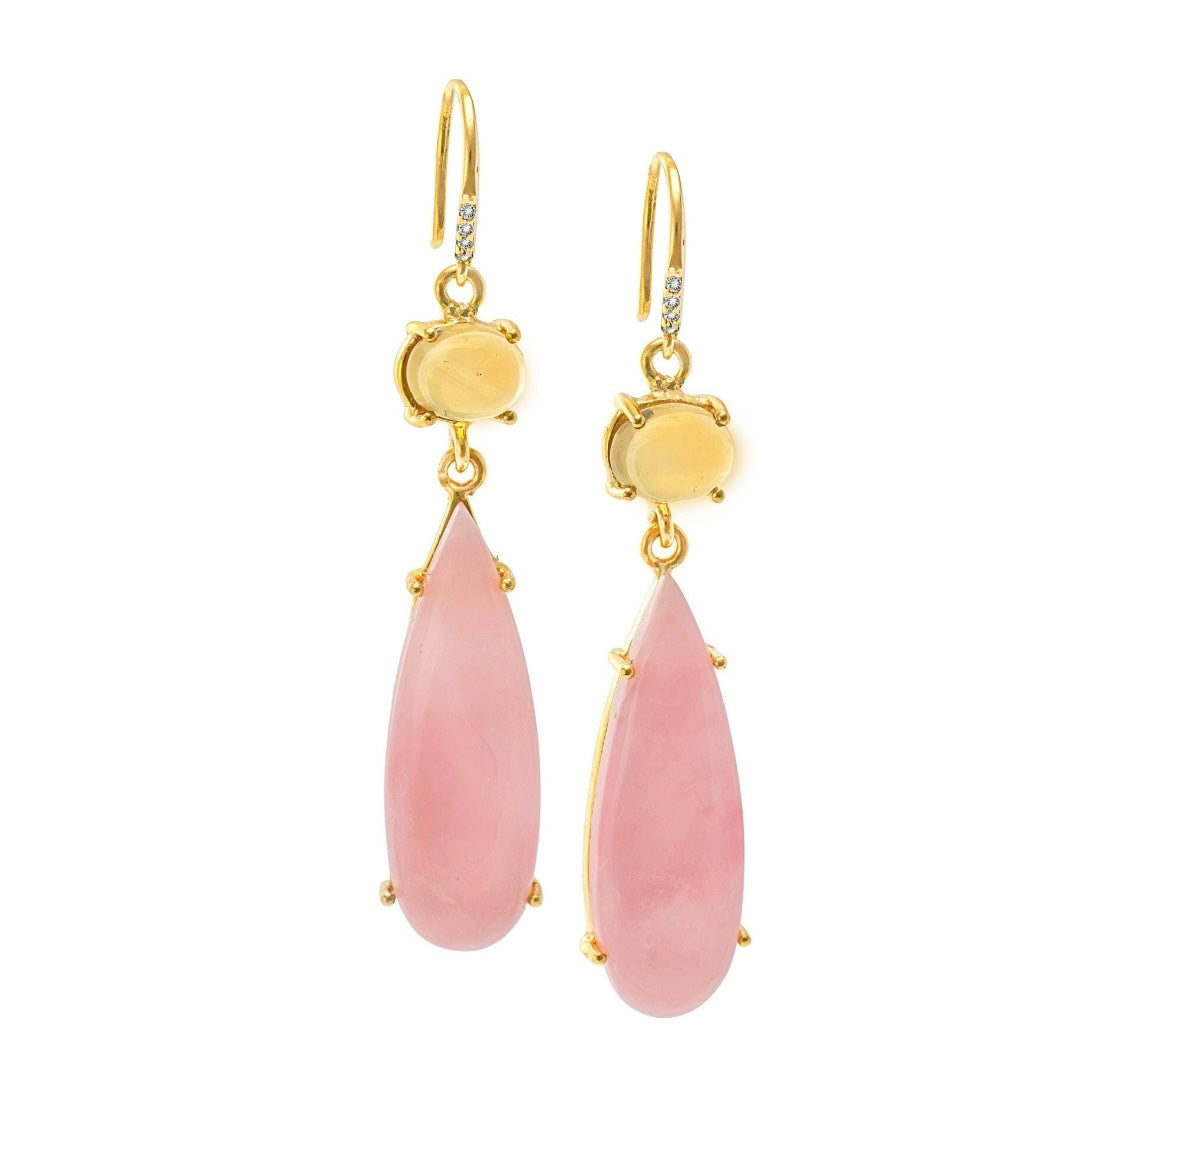 18k Gold Vermeil Citrine and Peruvian Pink Opal Hook Earrings: The Claudia